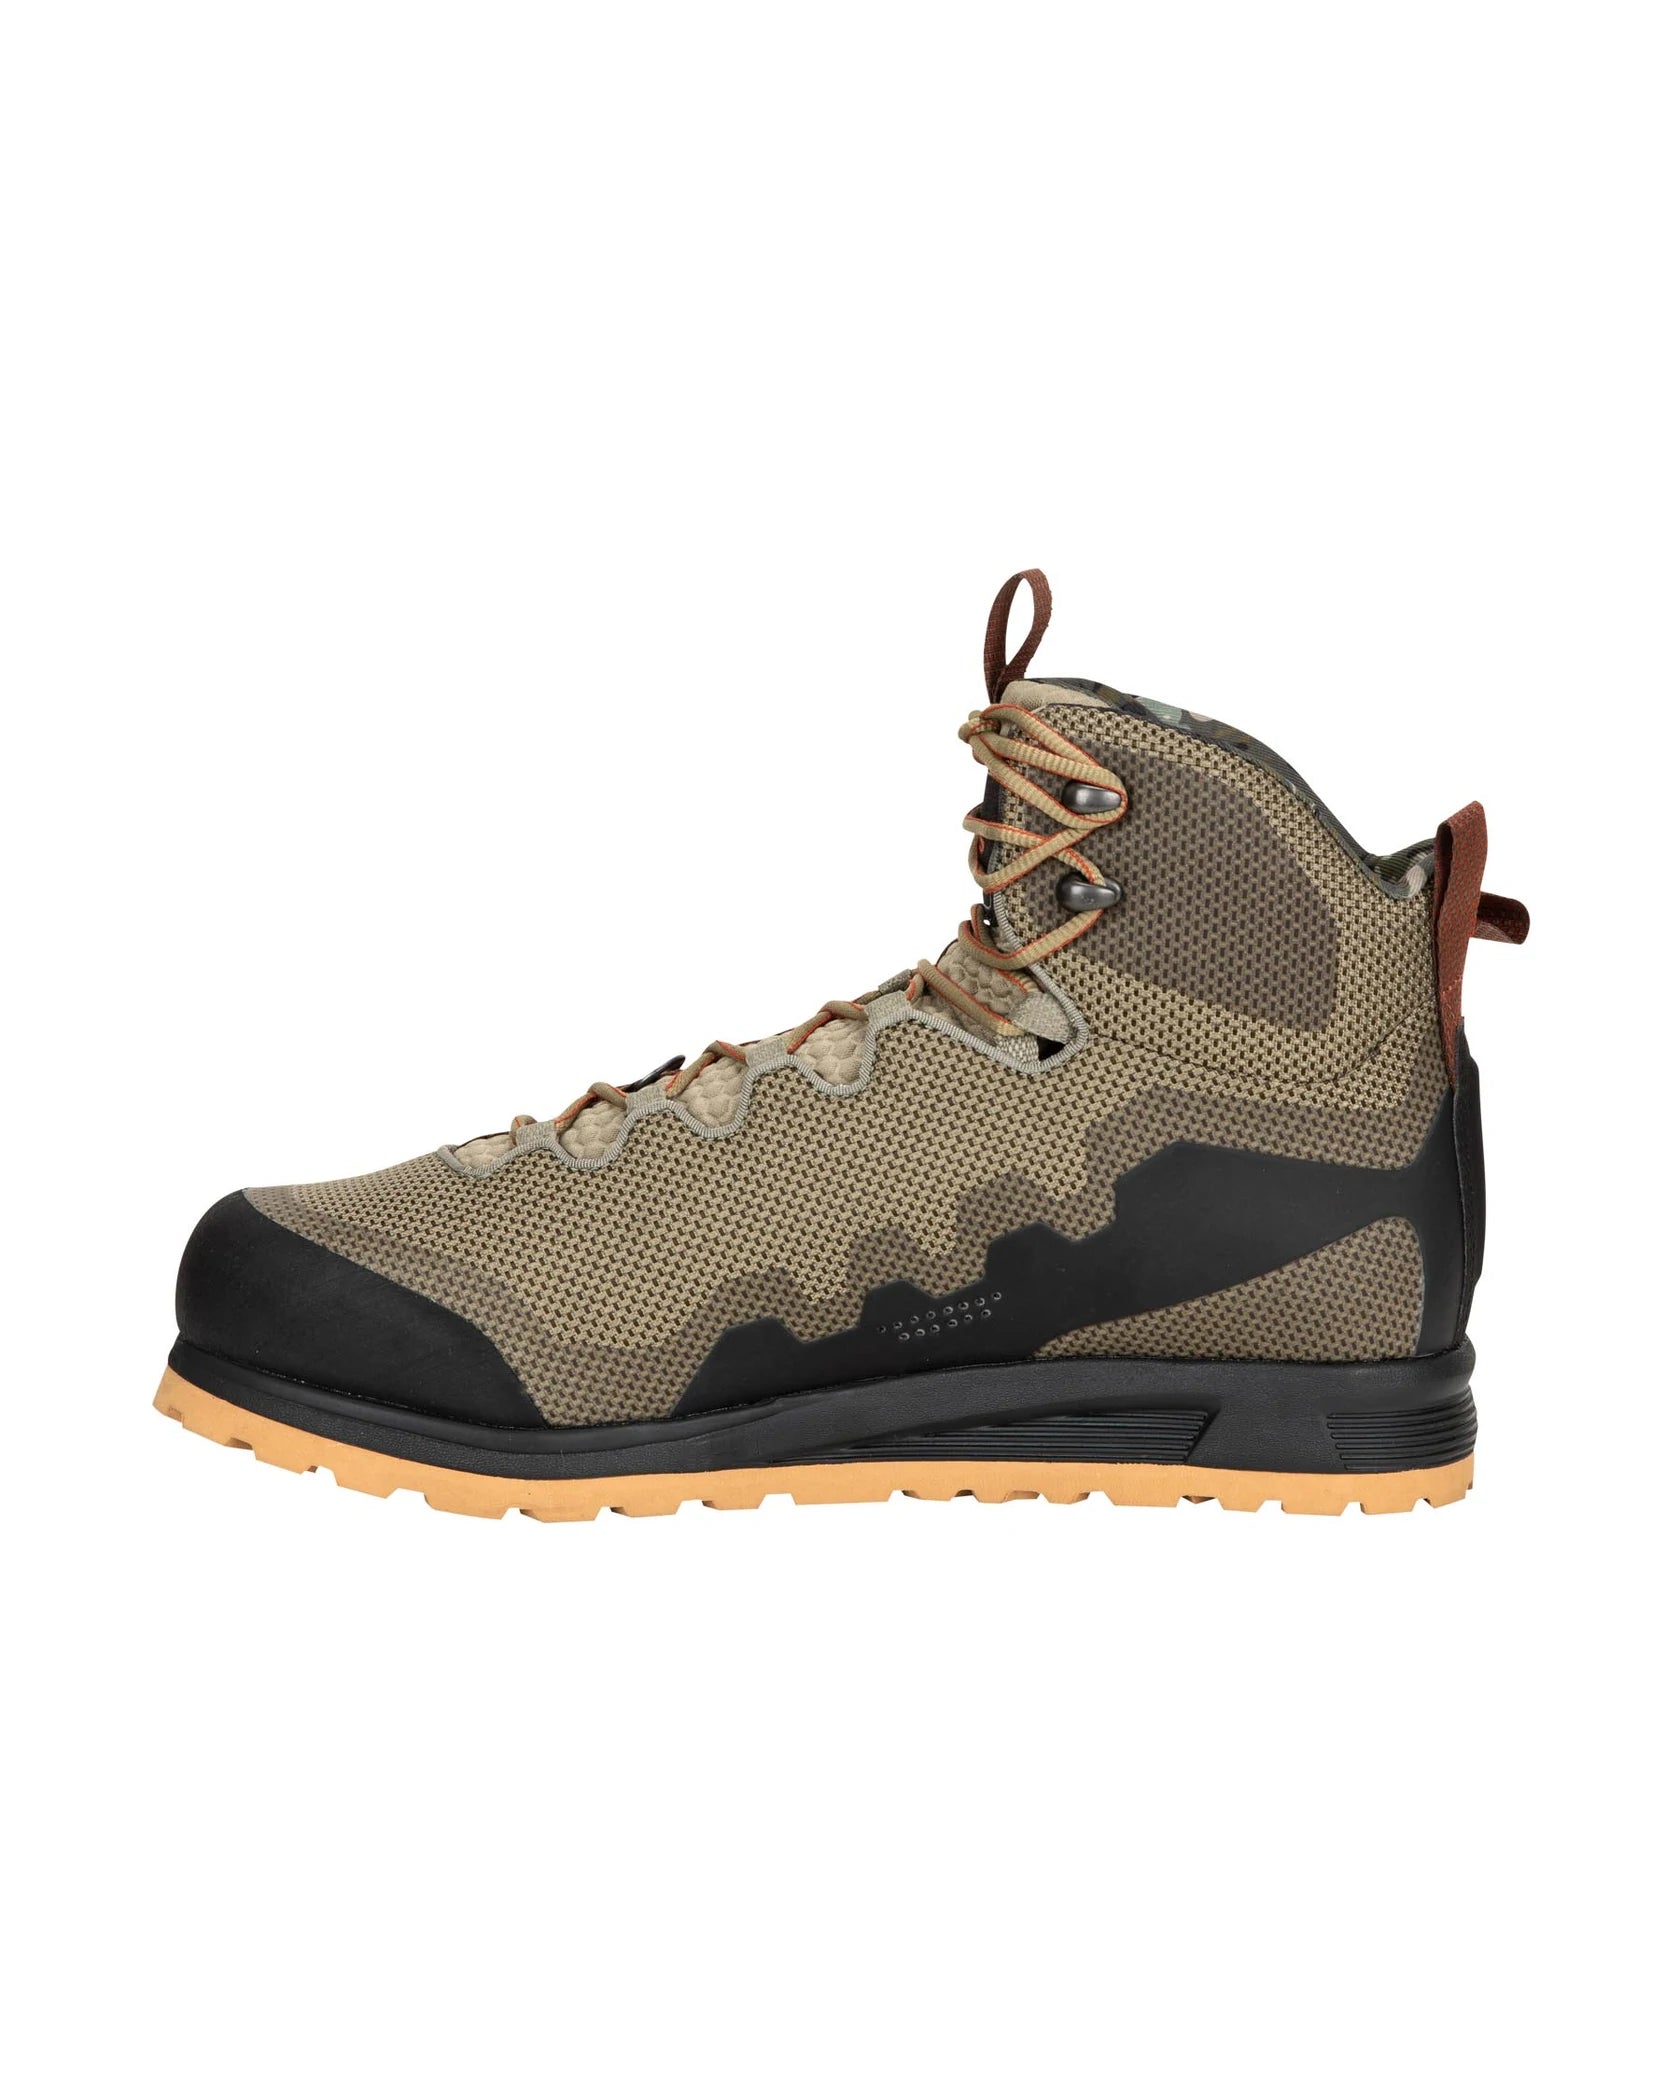 Simms Flyweight Access Wading Boot -  - Mansfield Hunting & Fishing - Products to prepare for Corona Virus